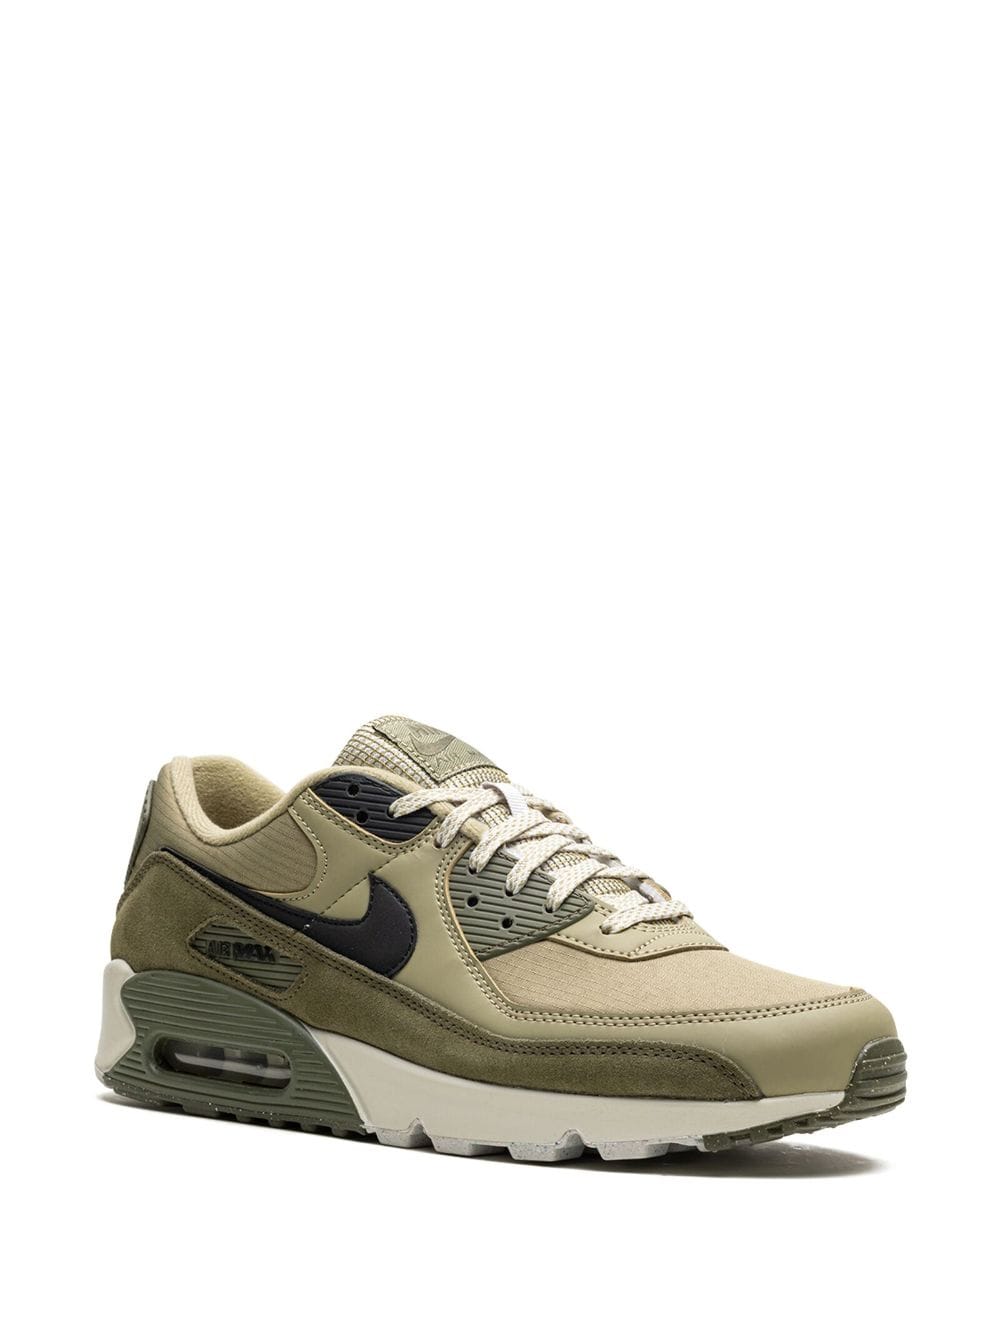 Image 2 of Nike Air Max 90 "Neutral Olive" sneakers